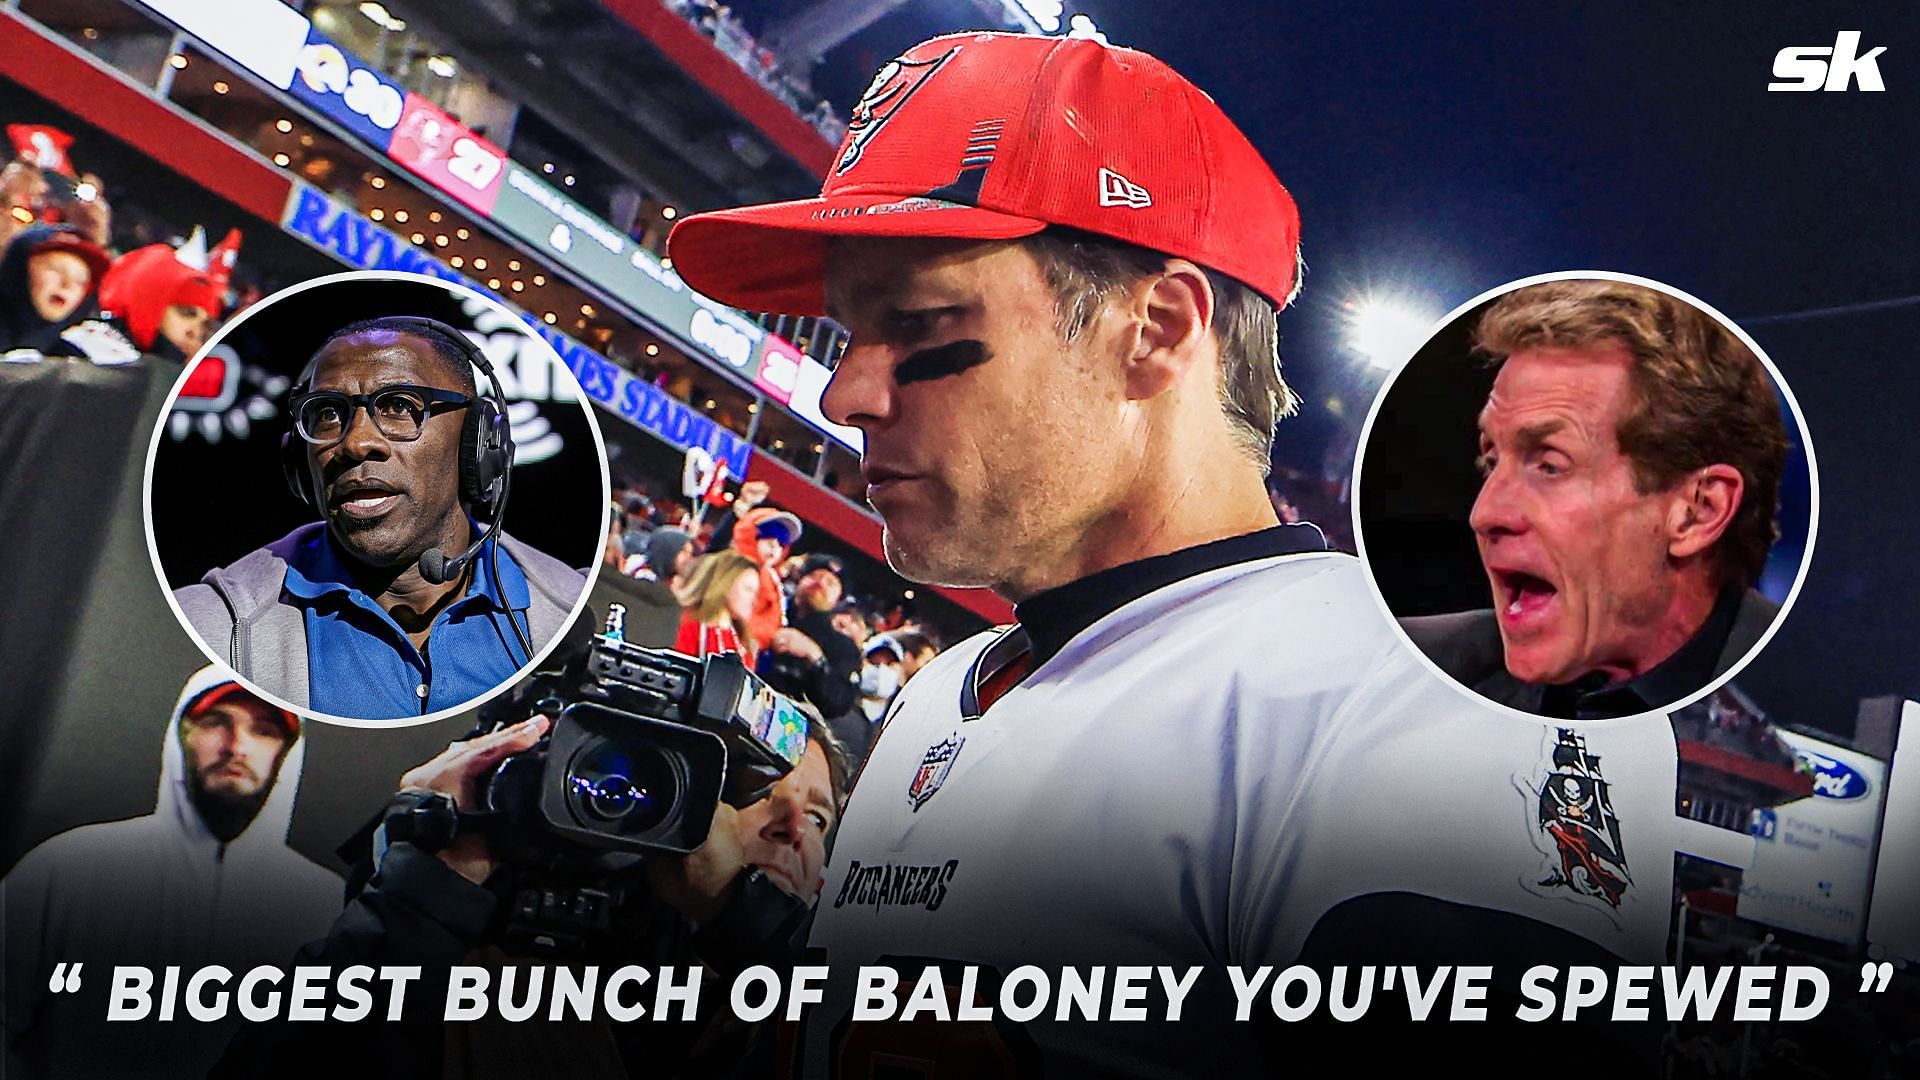 Skip Bayless and Shannon Sharpe disagree over Brady&#039;s performance